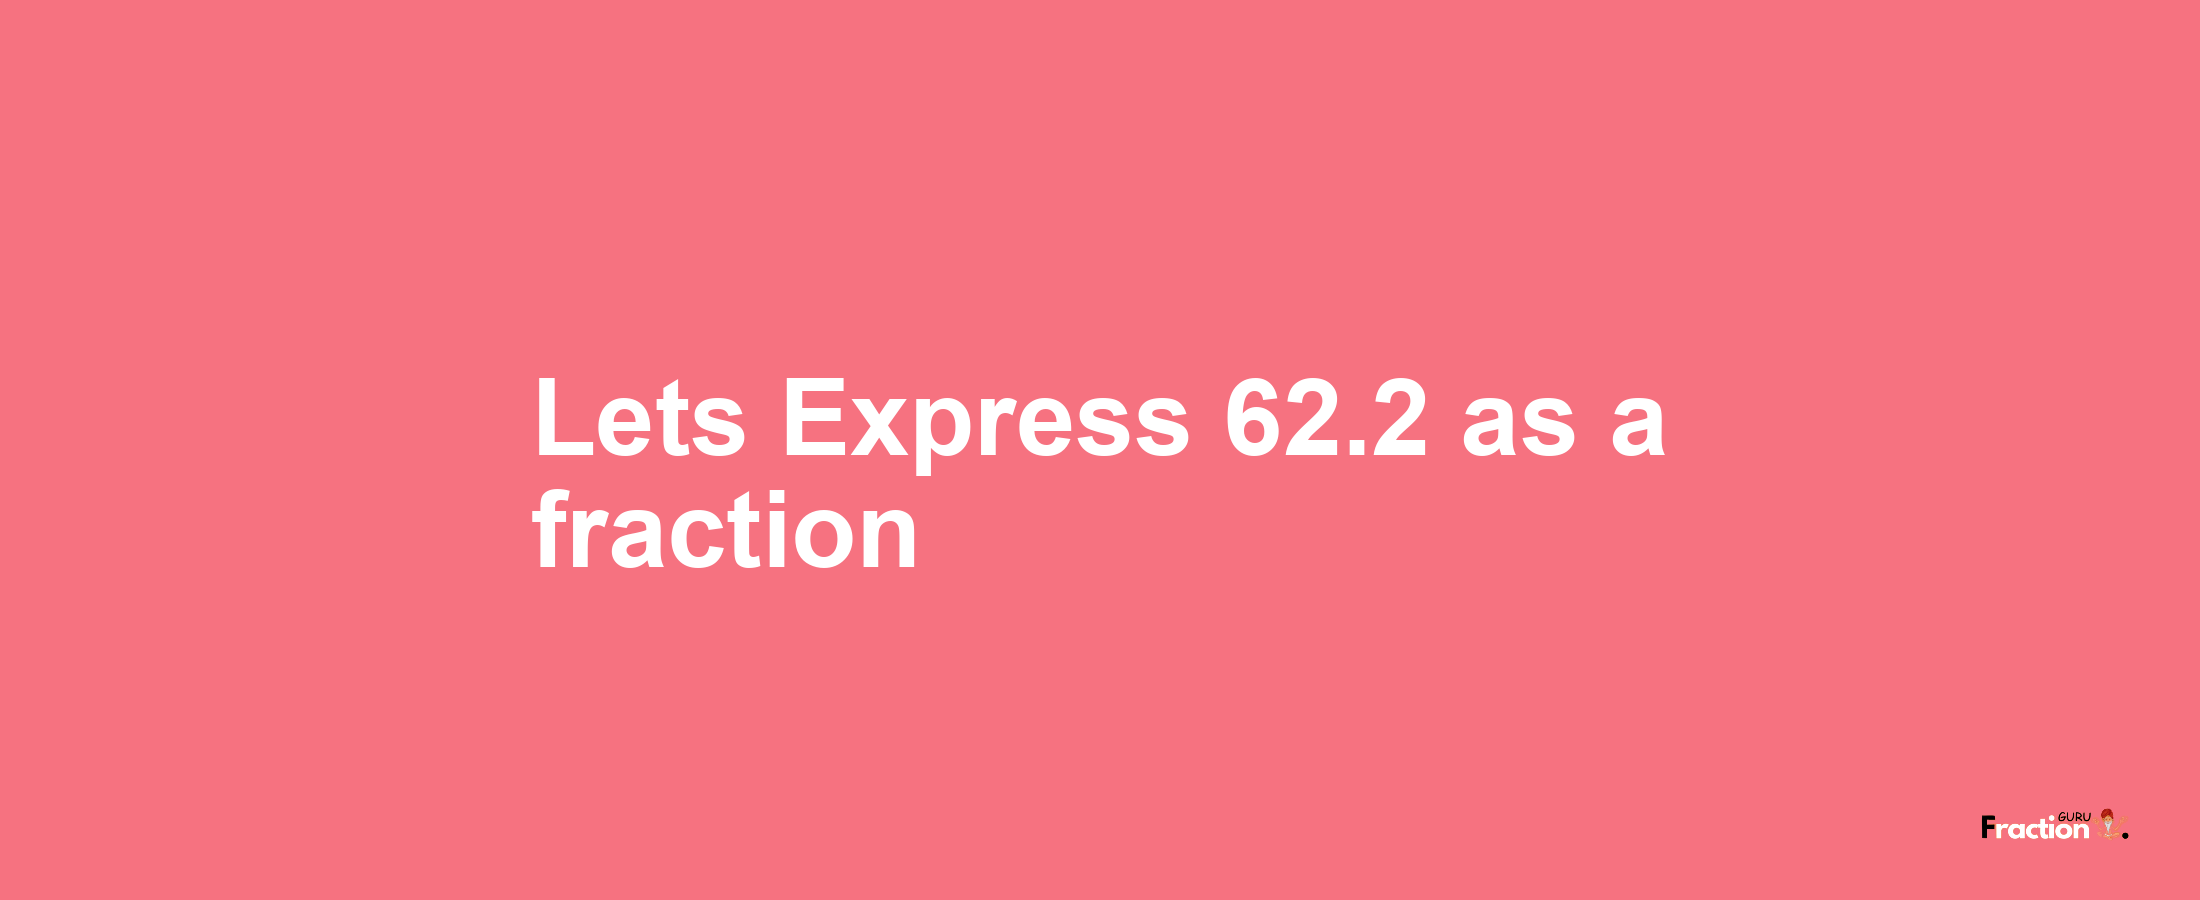 Lets Express 62.2 as afraction